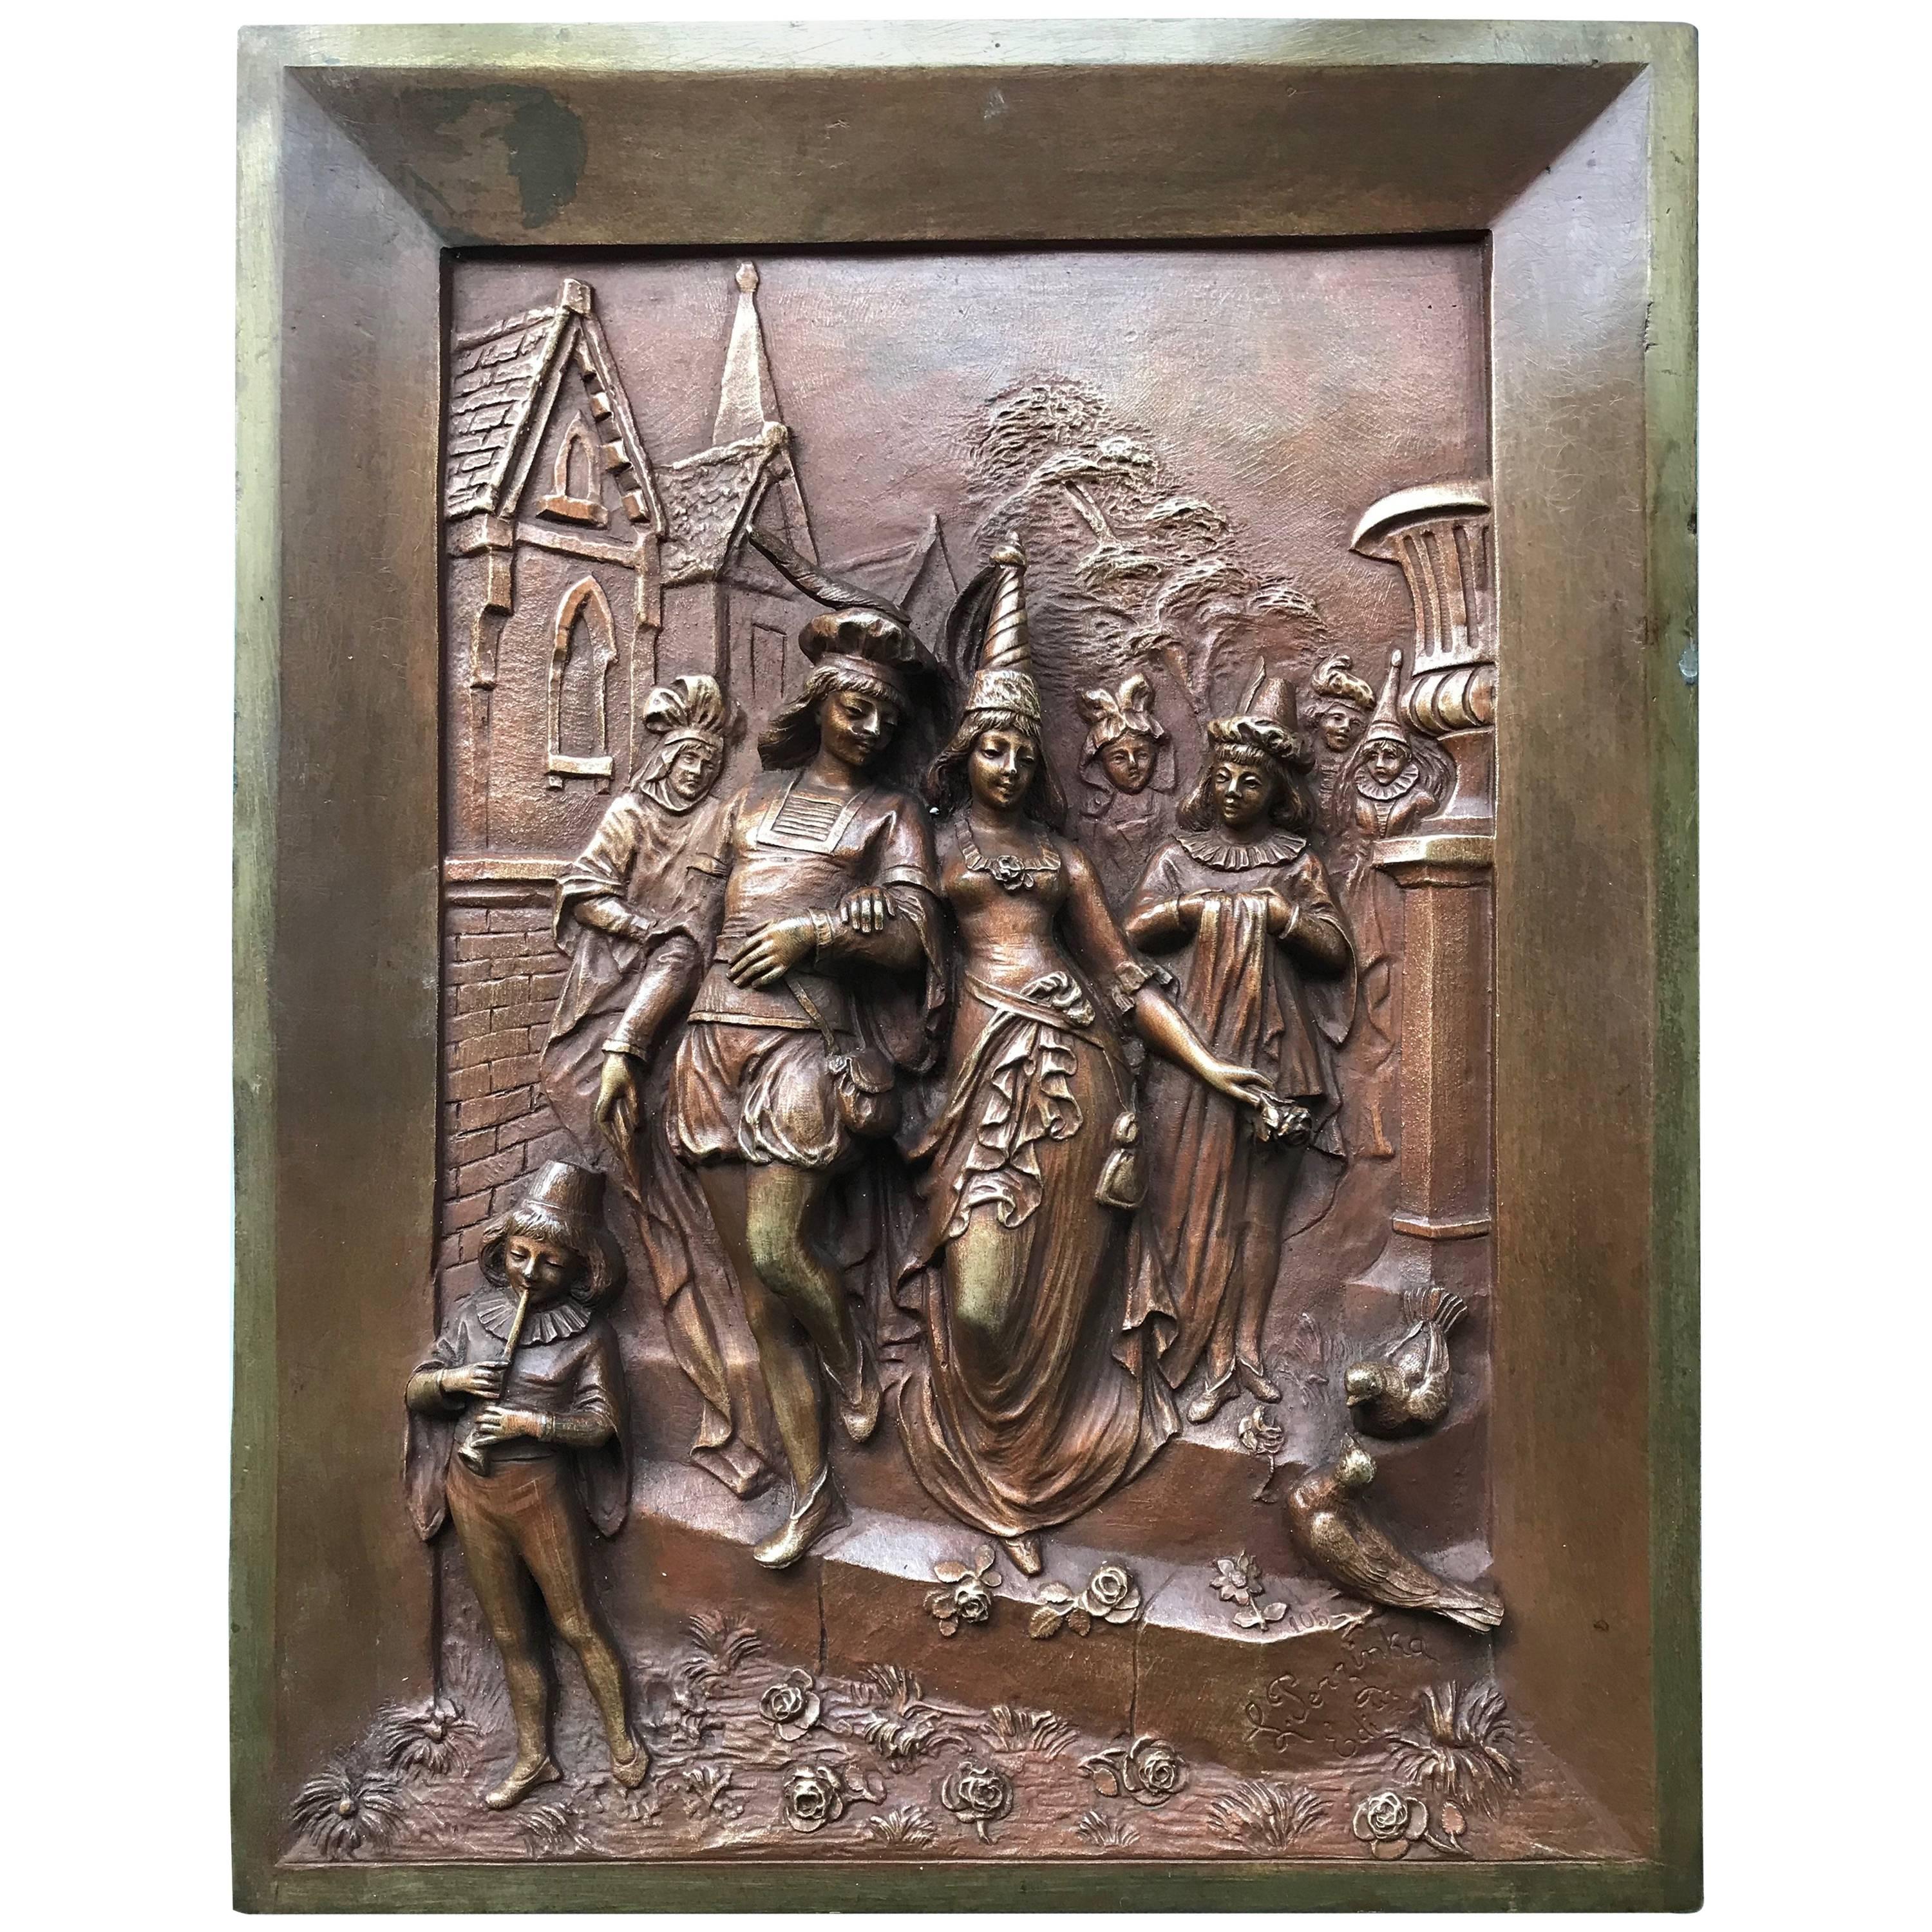 Late 1800s Bronze Wall Plaque by Leon Perzinka, Depicting Marriage Scene/Party